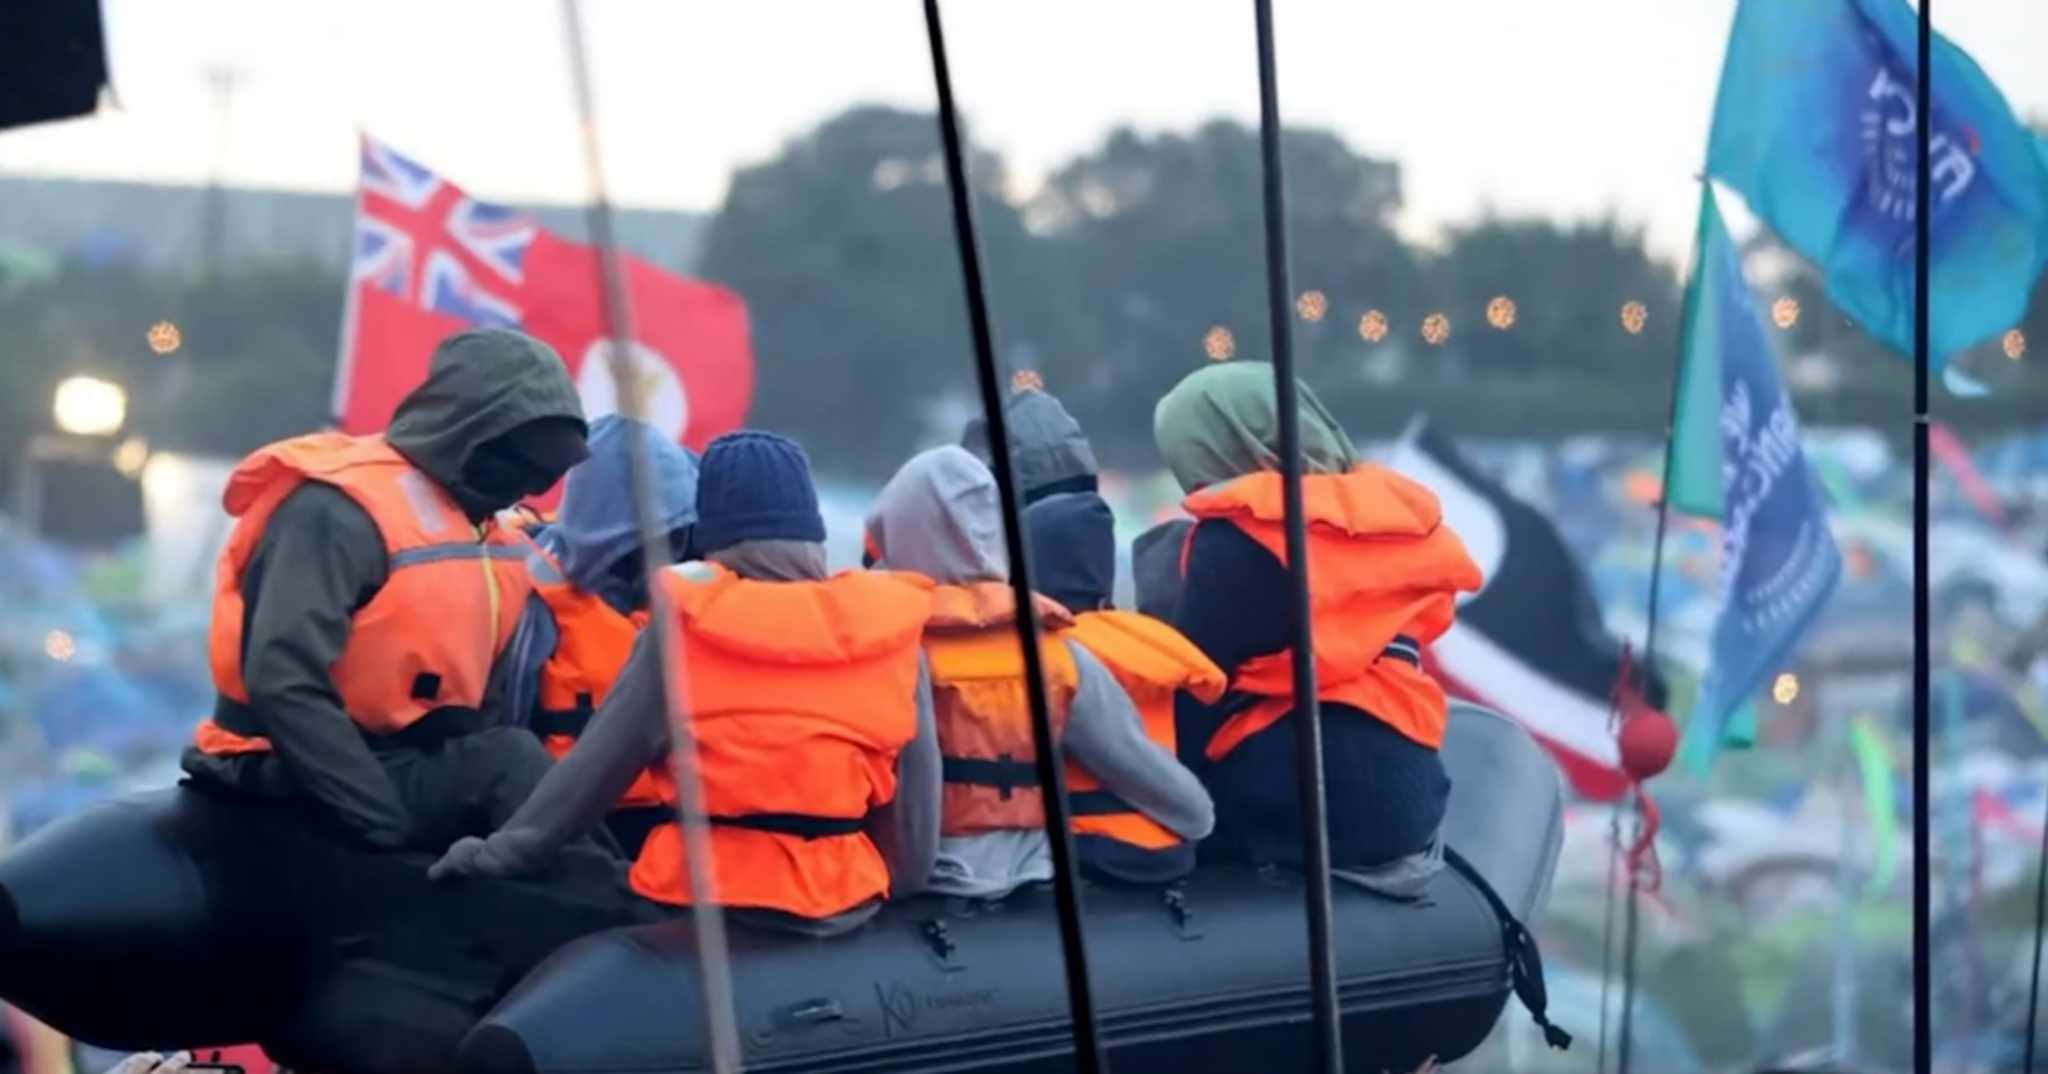 The Banksy inflatable migrant boat artwork was released during Idles’ Glastonbury set